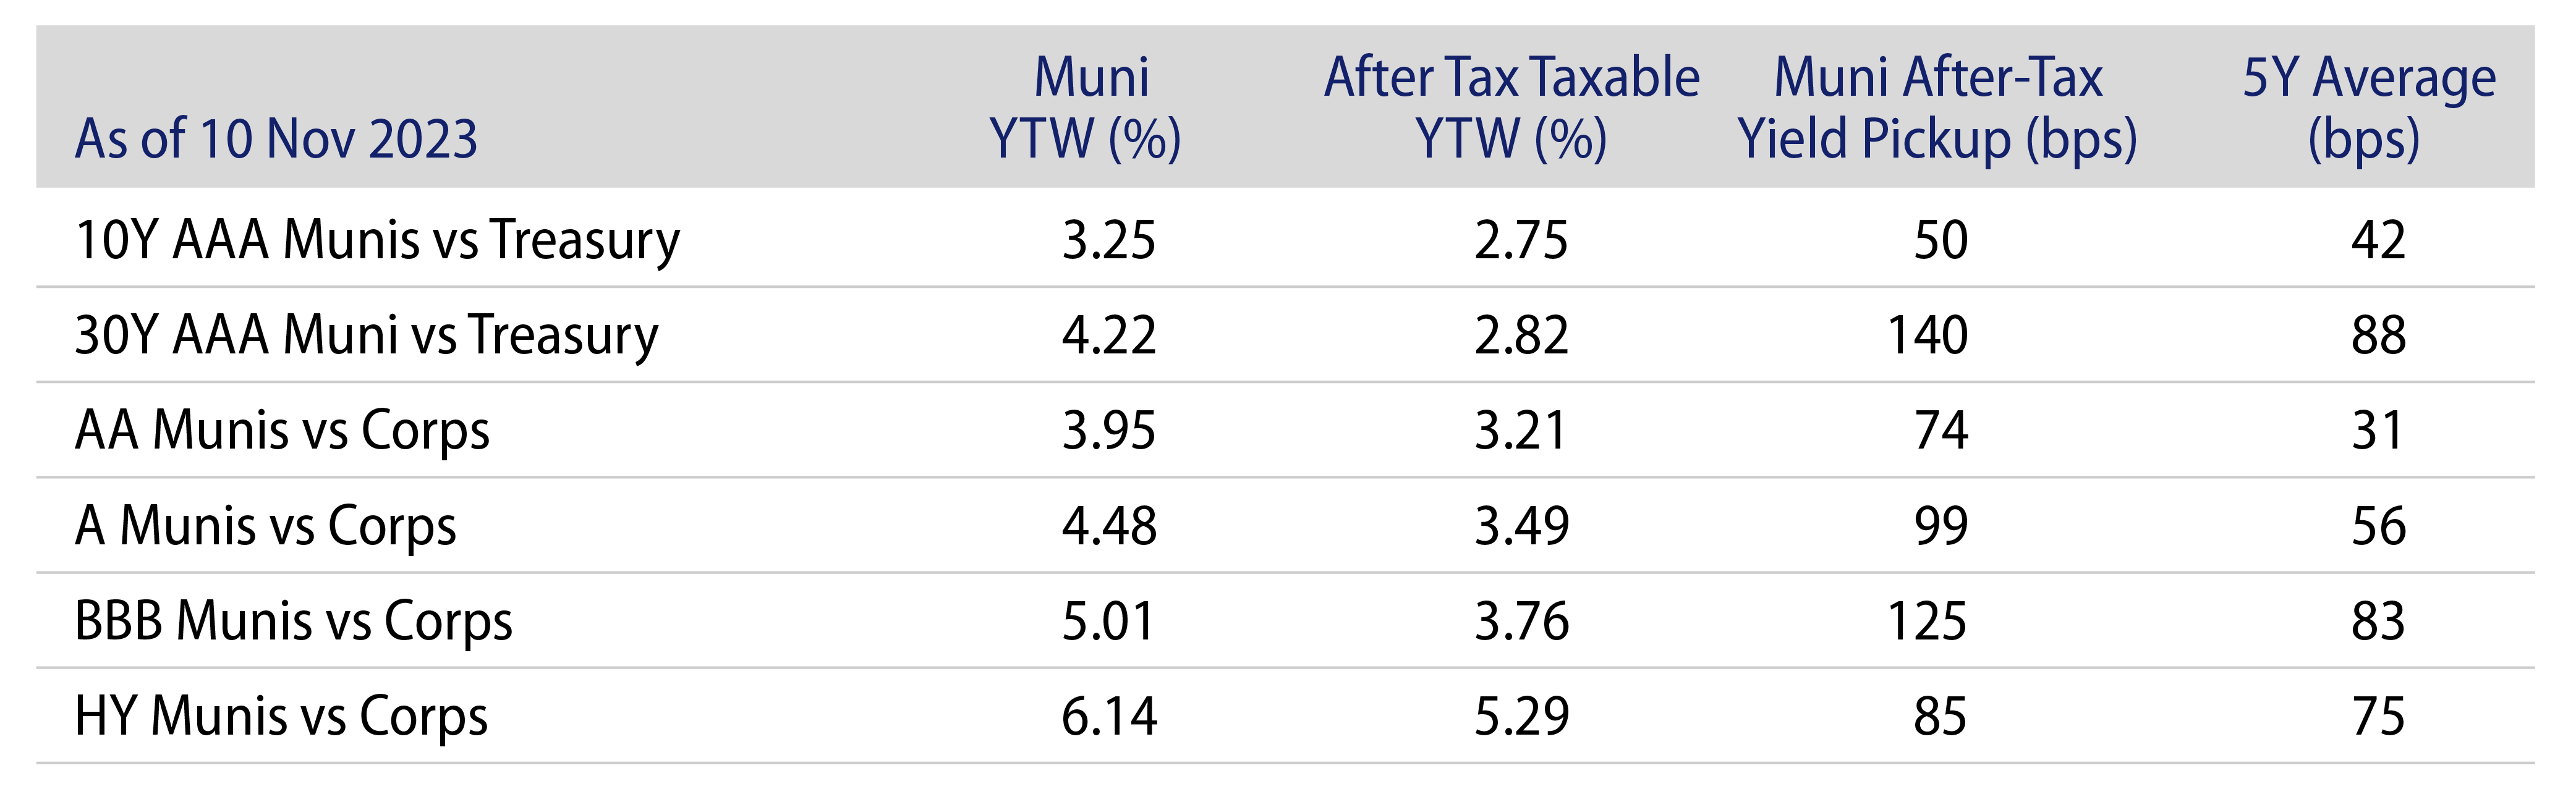 Explore Municipal vs. Taxable Fixed-Income Yields by Quality